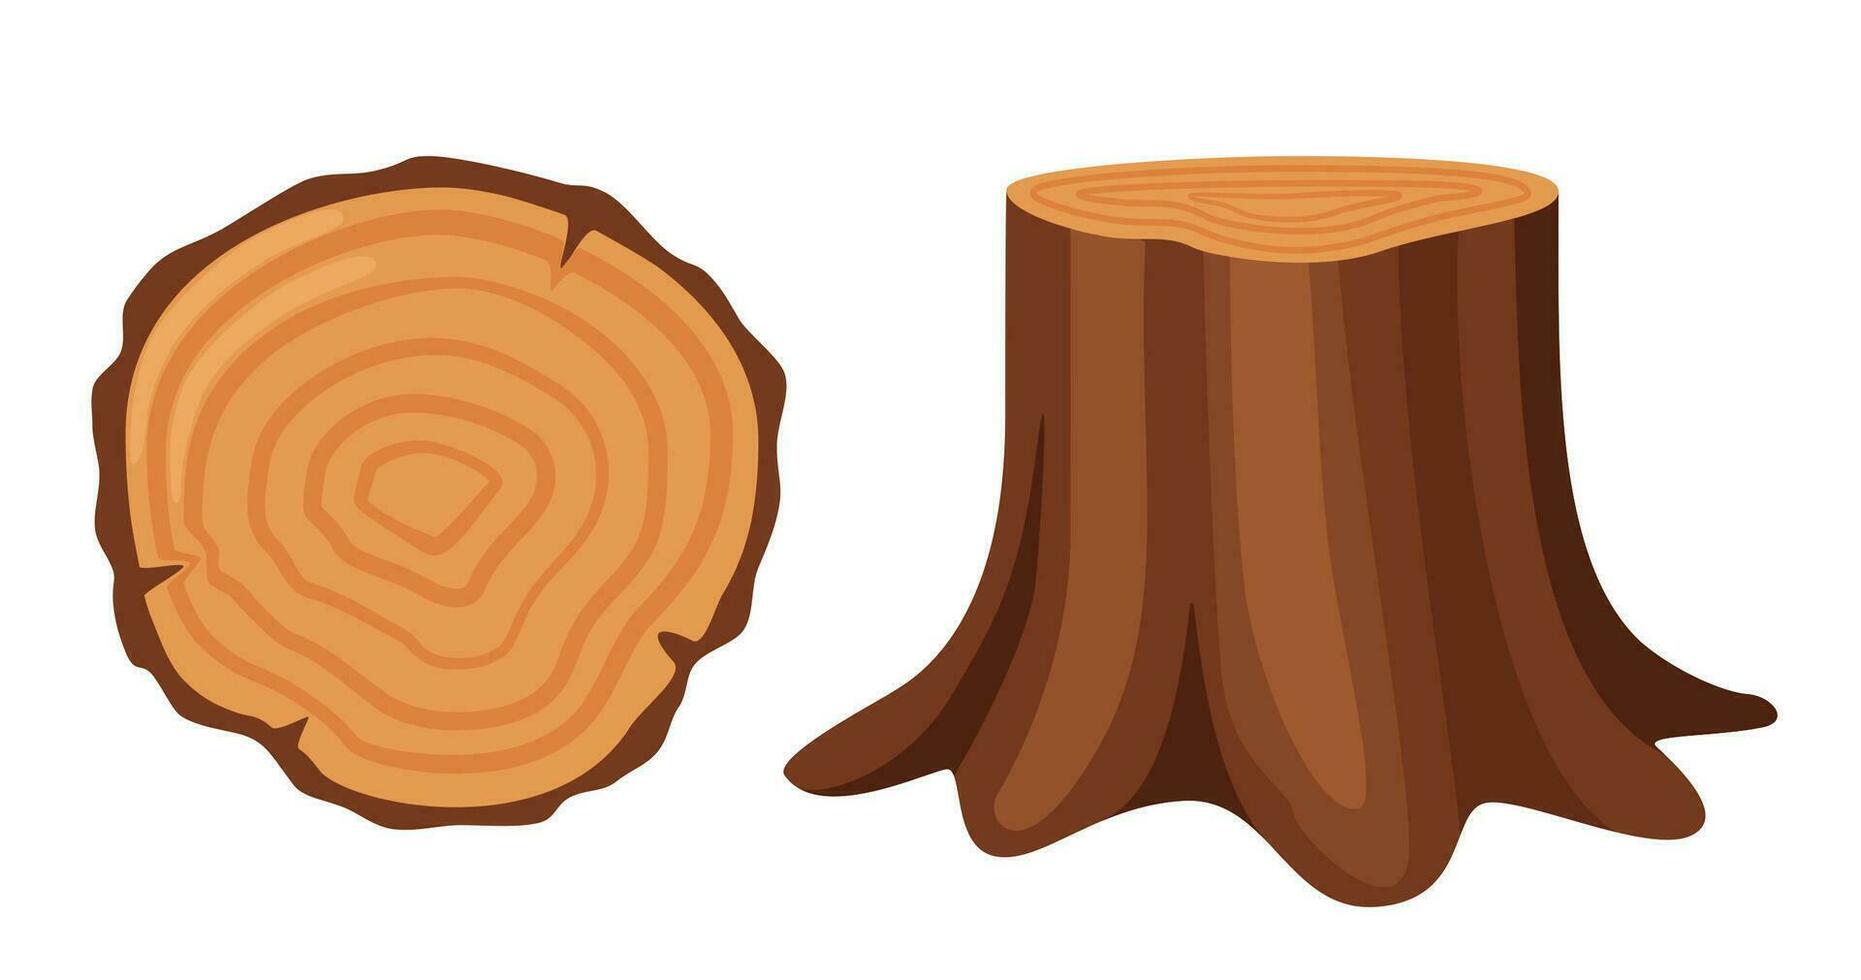 Tree stump, side and top view. Forestry and lumber industry. Vector illustration.